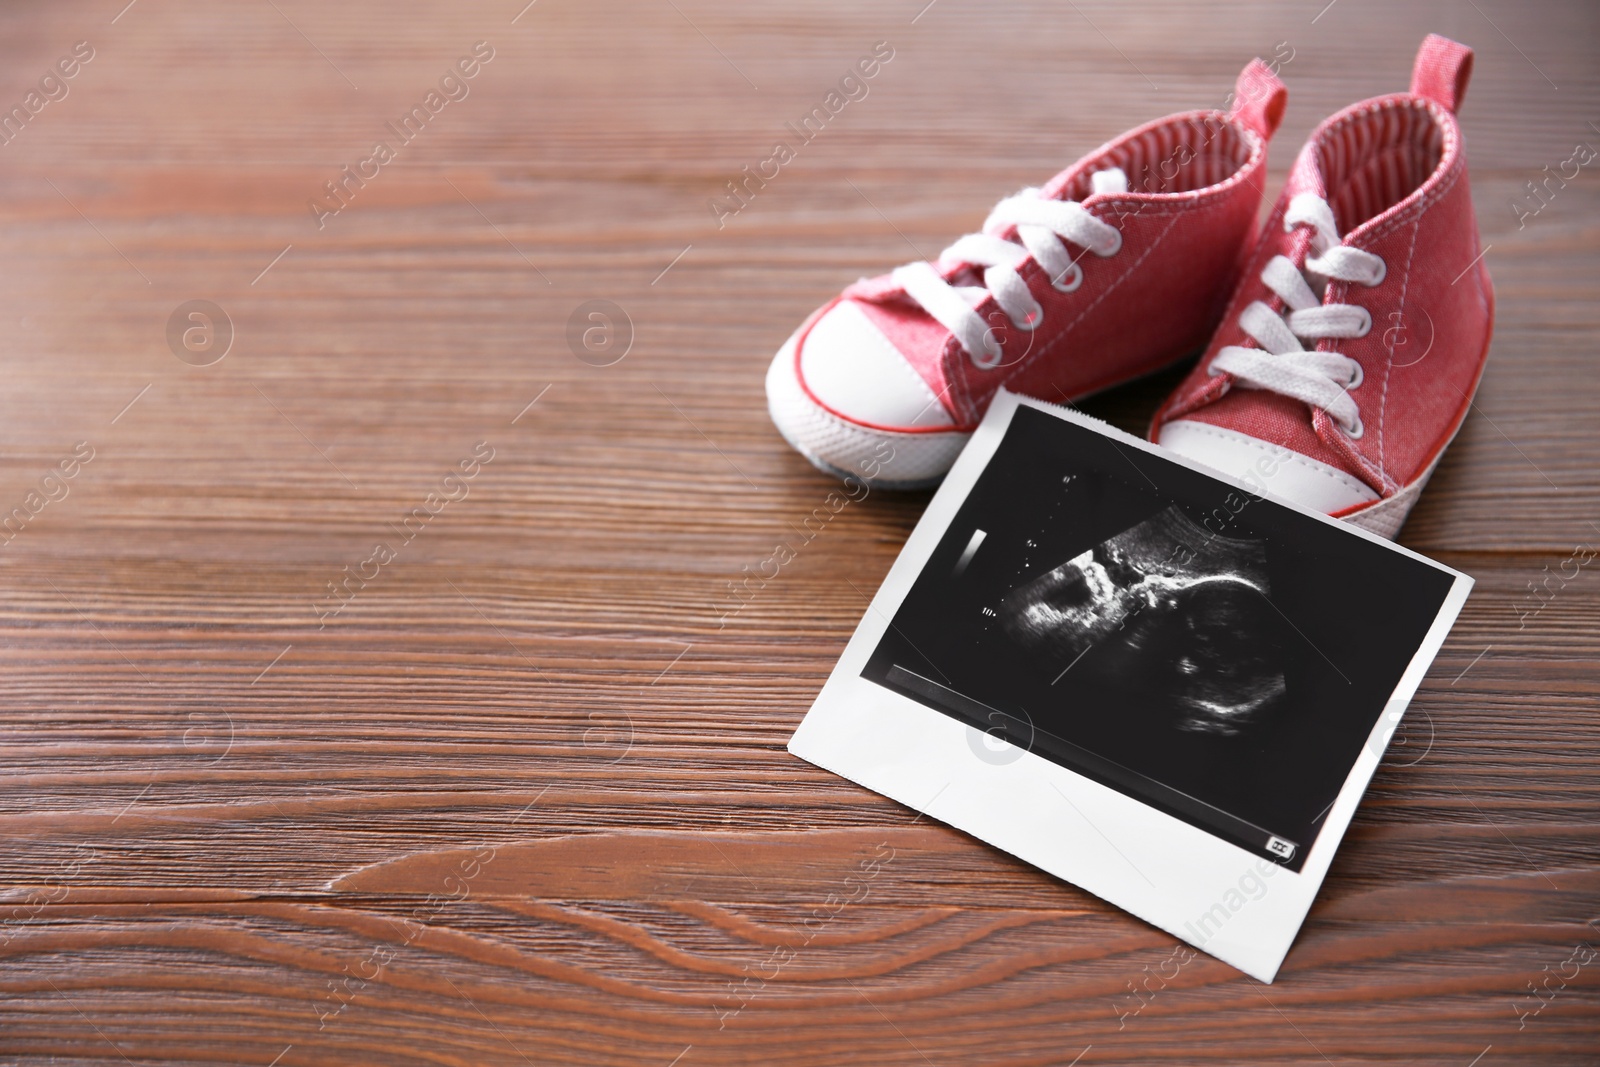 Photo of Ultrasound picture and baby shoes on wooden background. Space for text